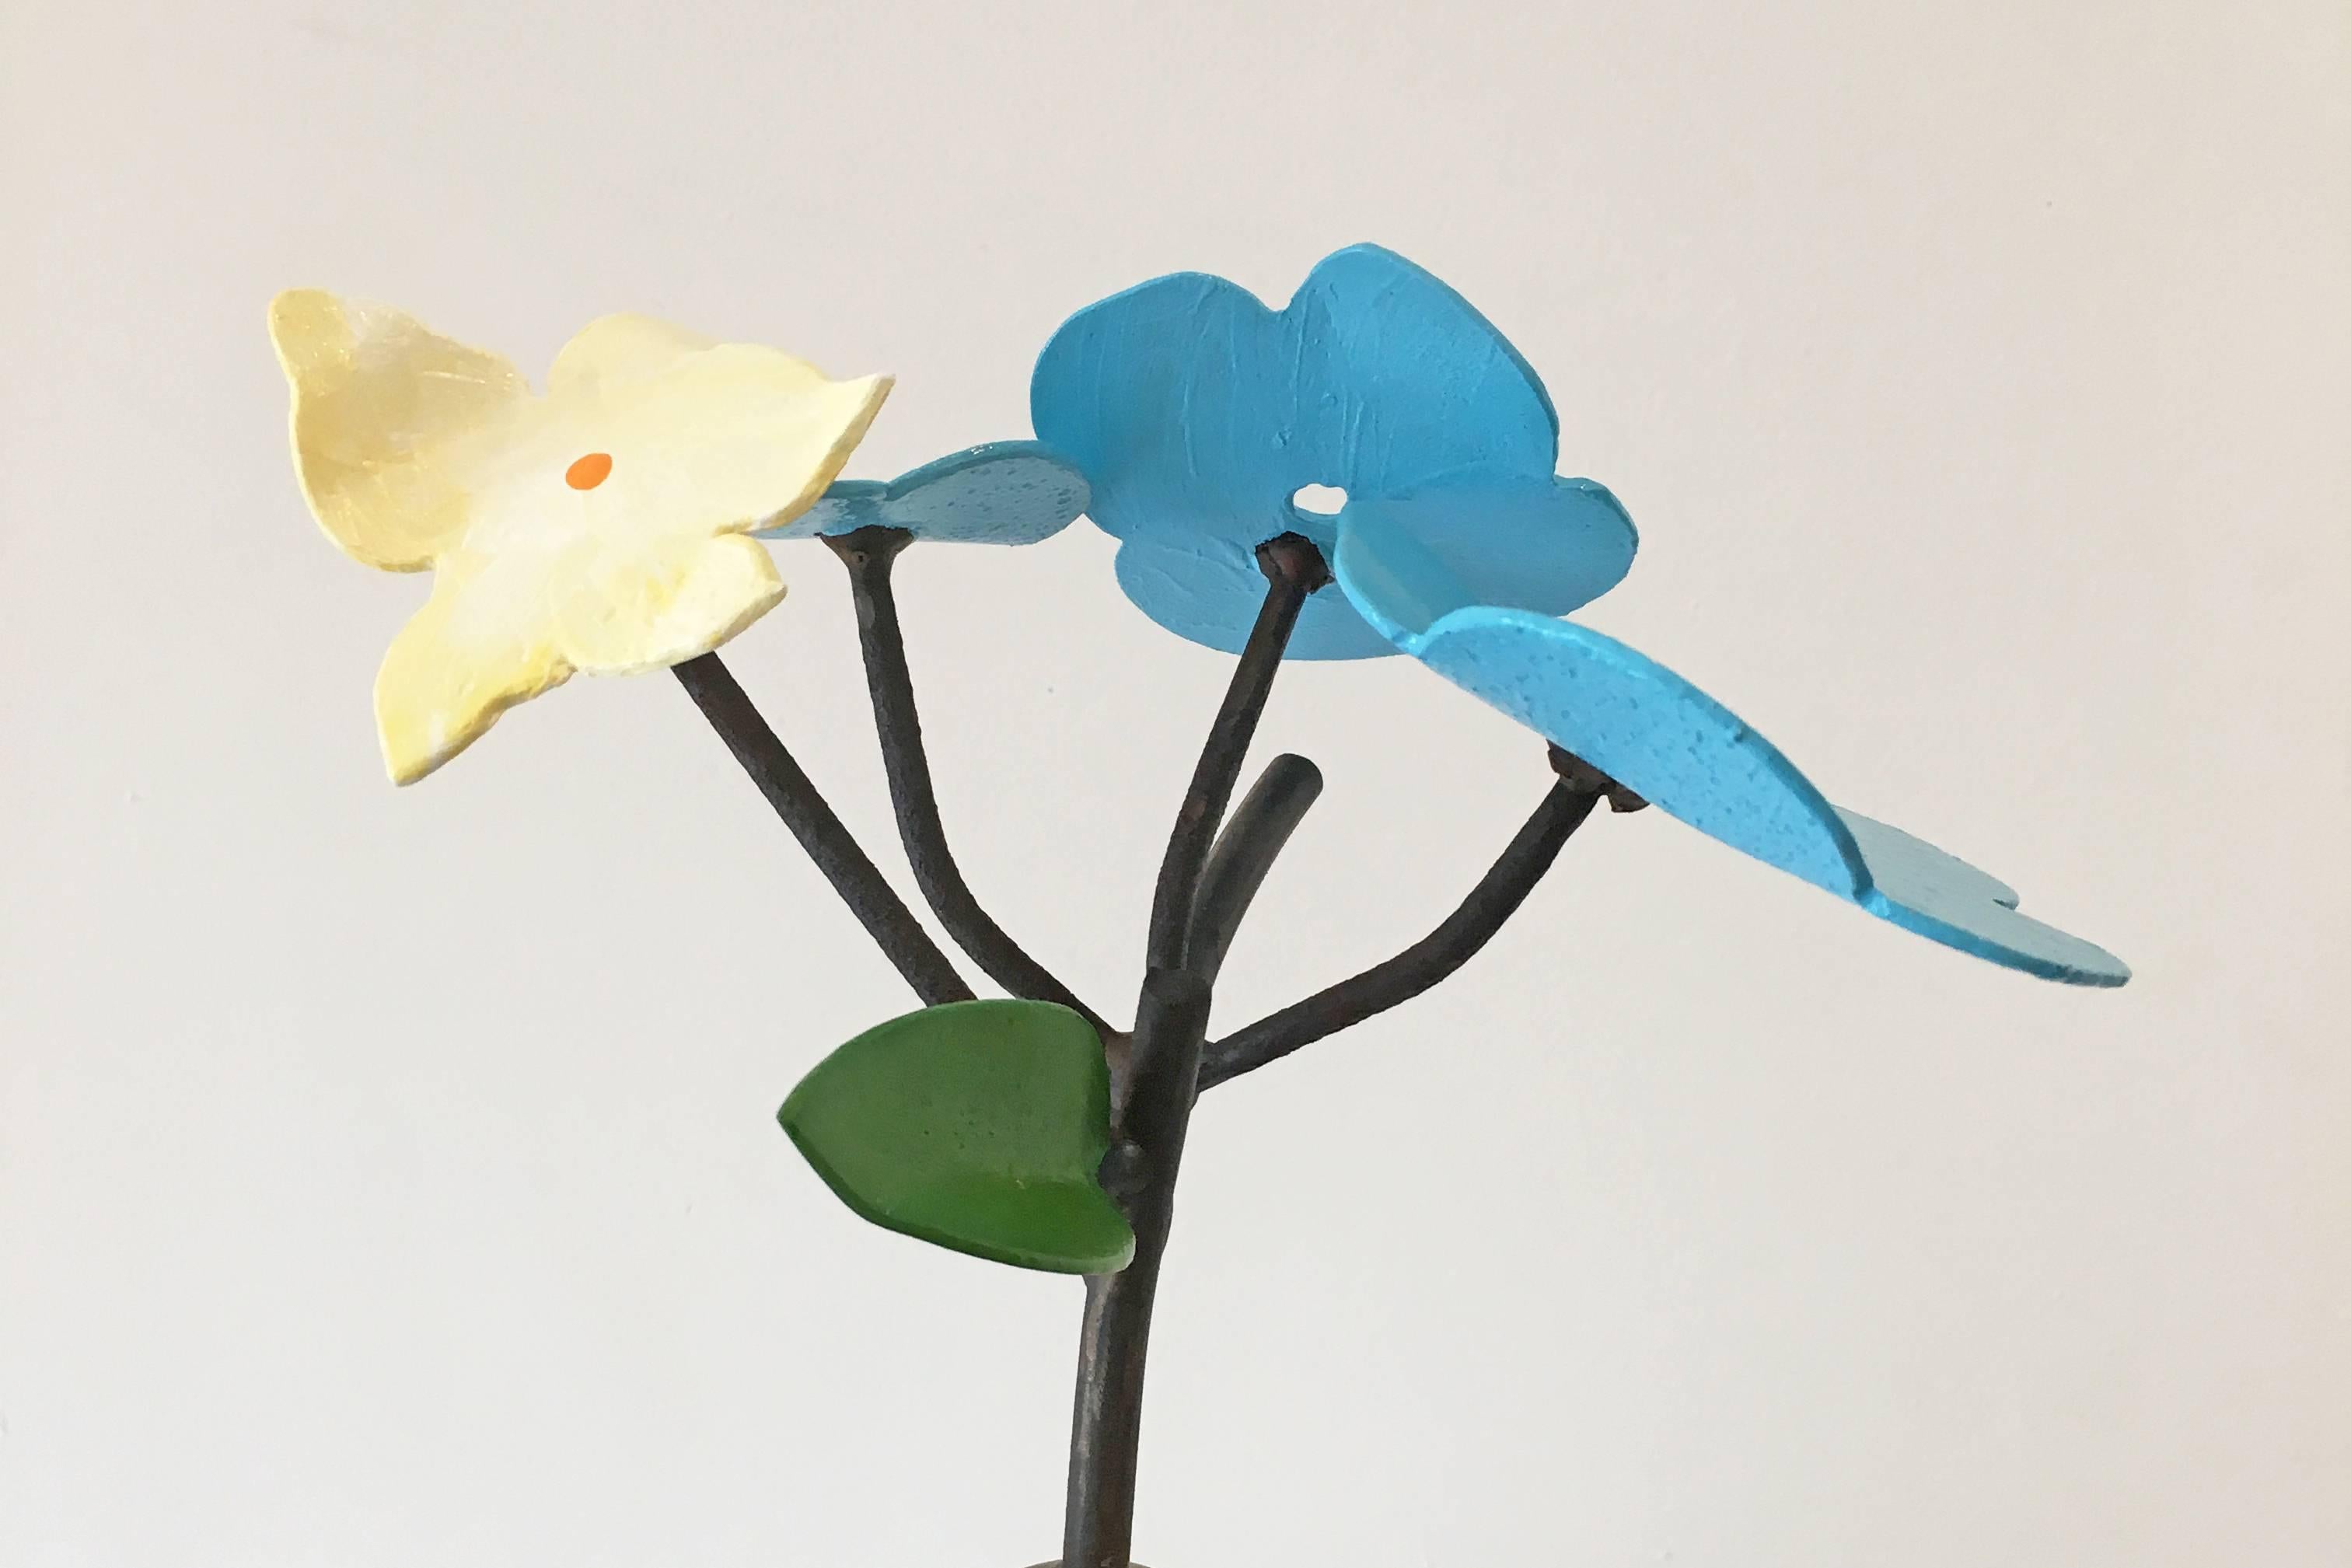 Blue Flowers - Realist Sculpture by David Kimball Anderson